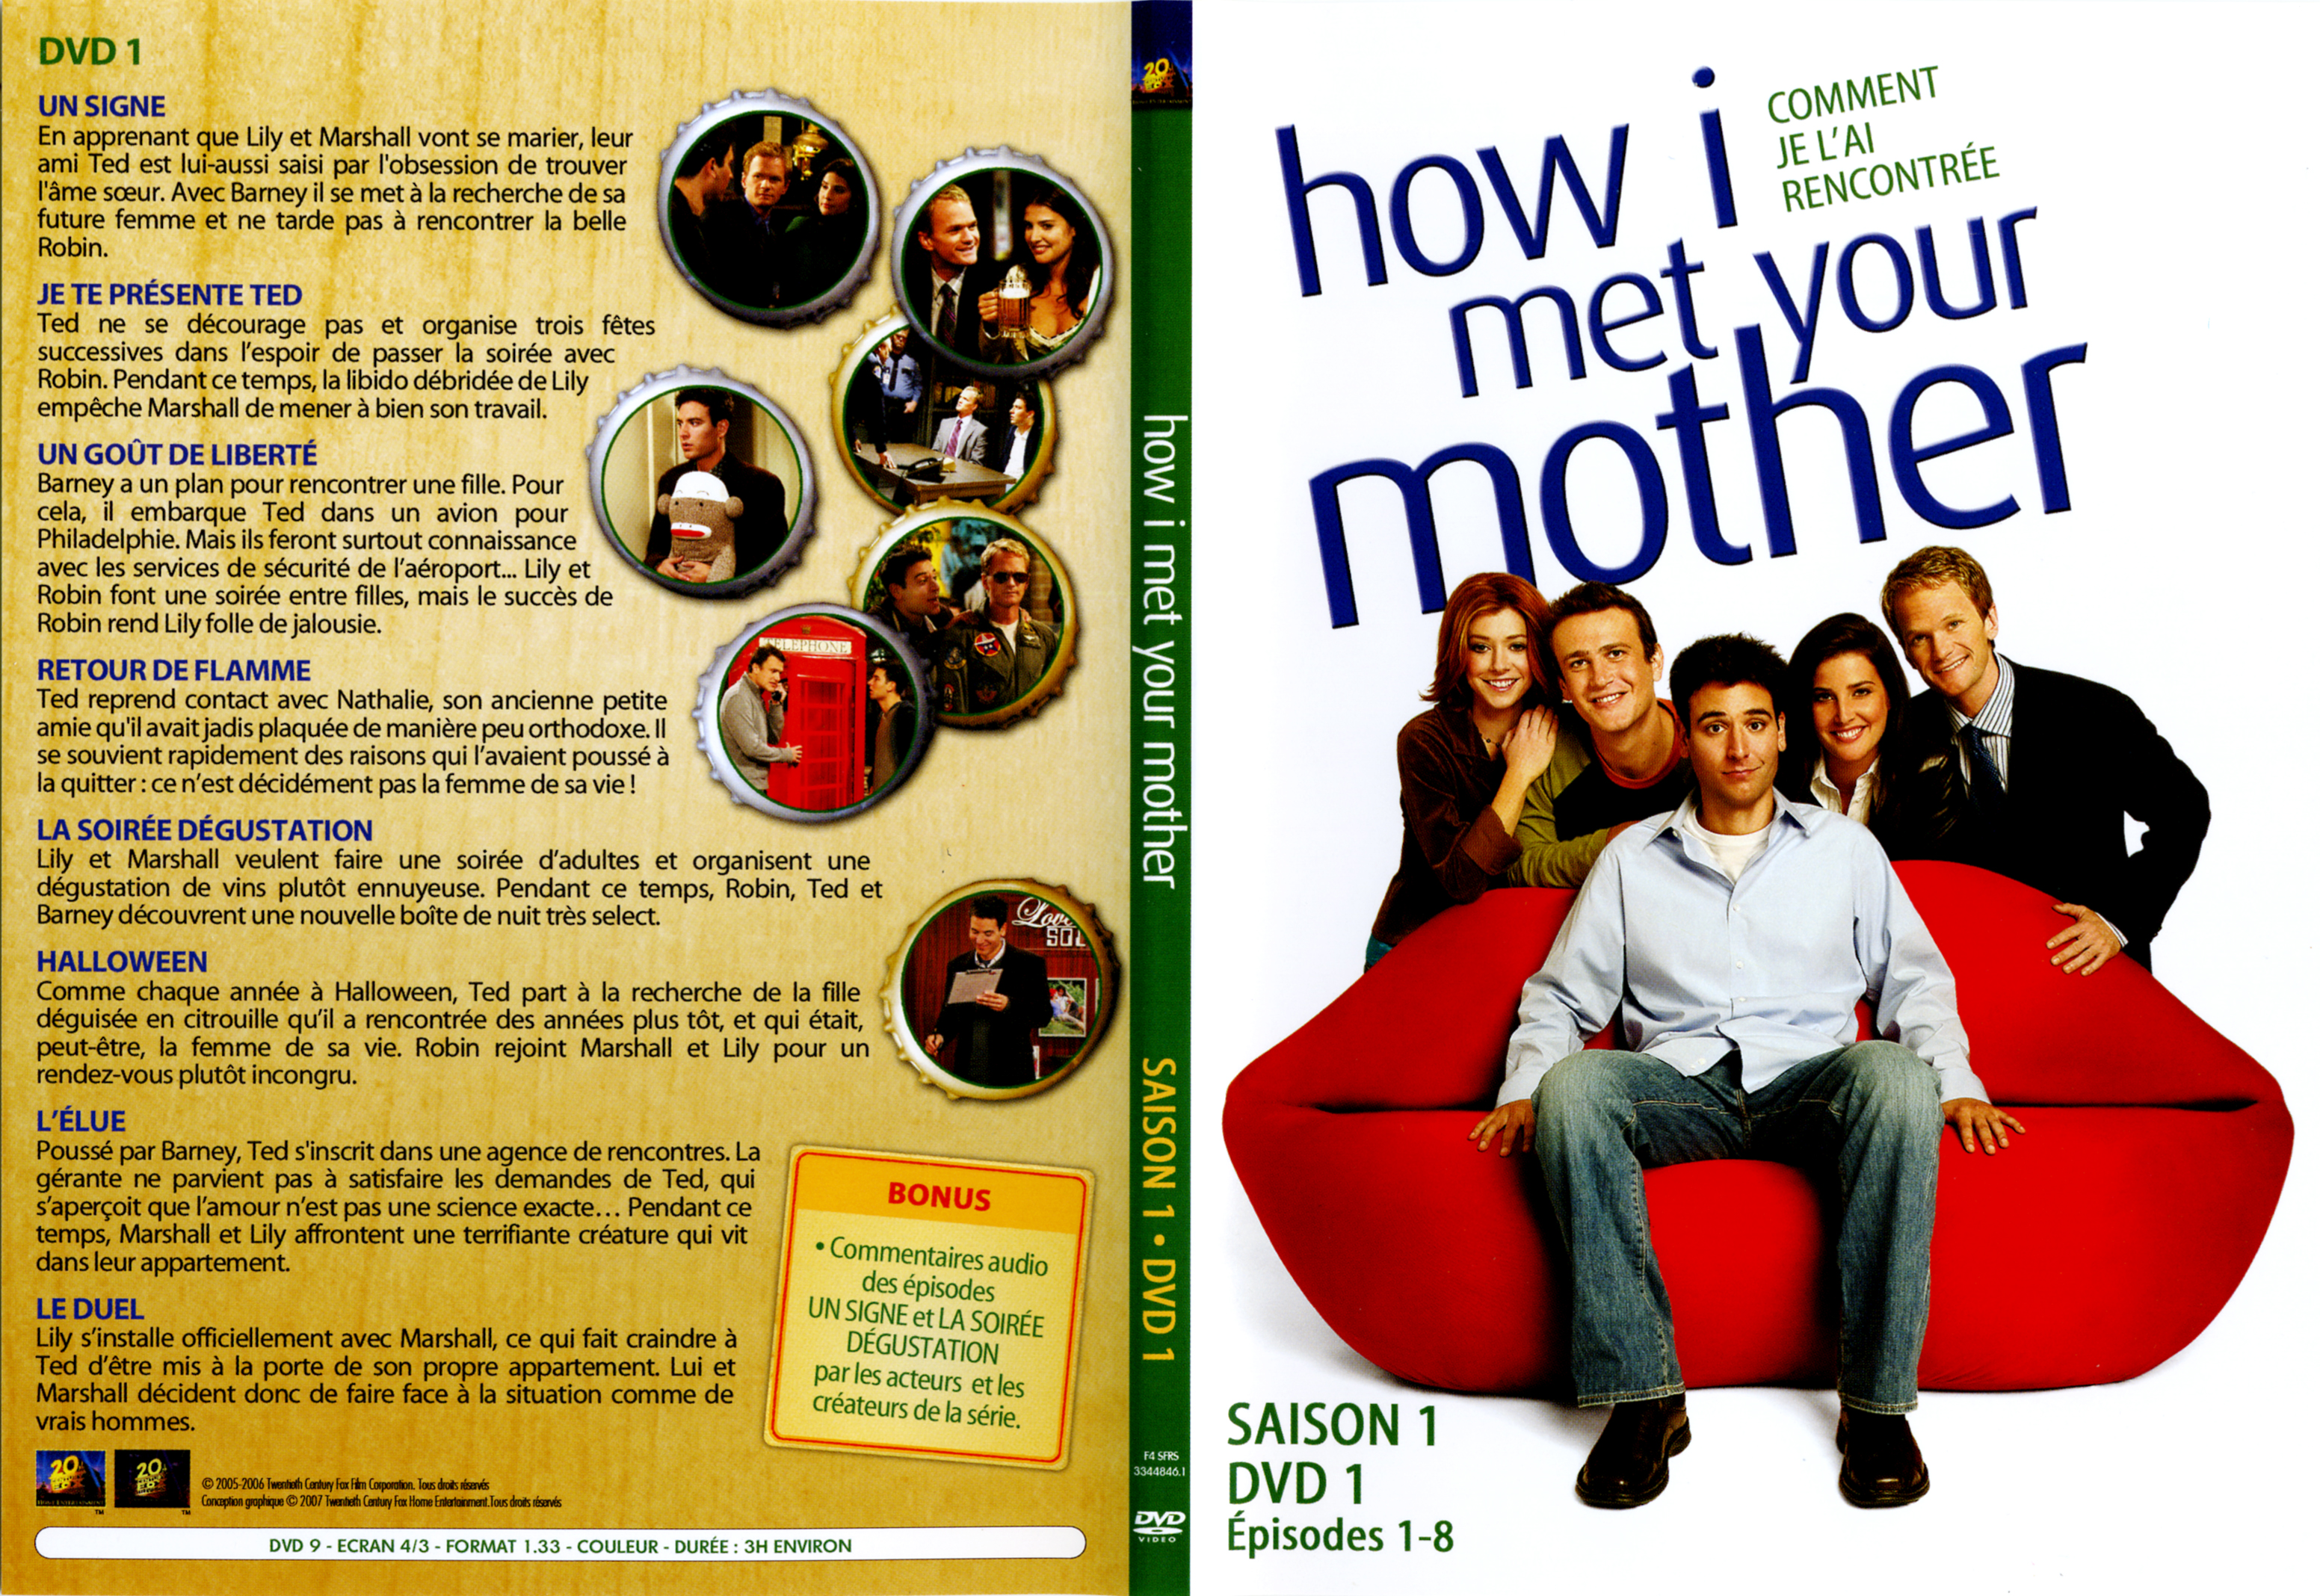 Jaquette DVD How i met your mother Saison 1 DVD 1